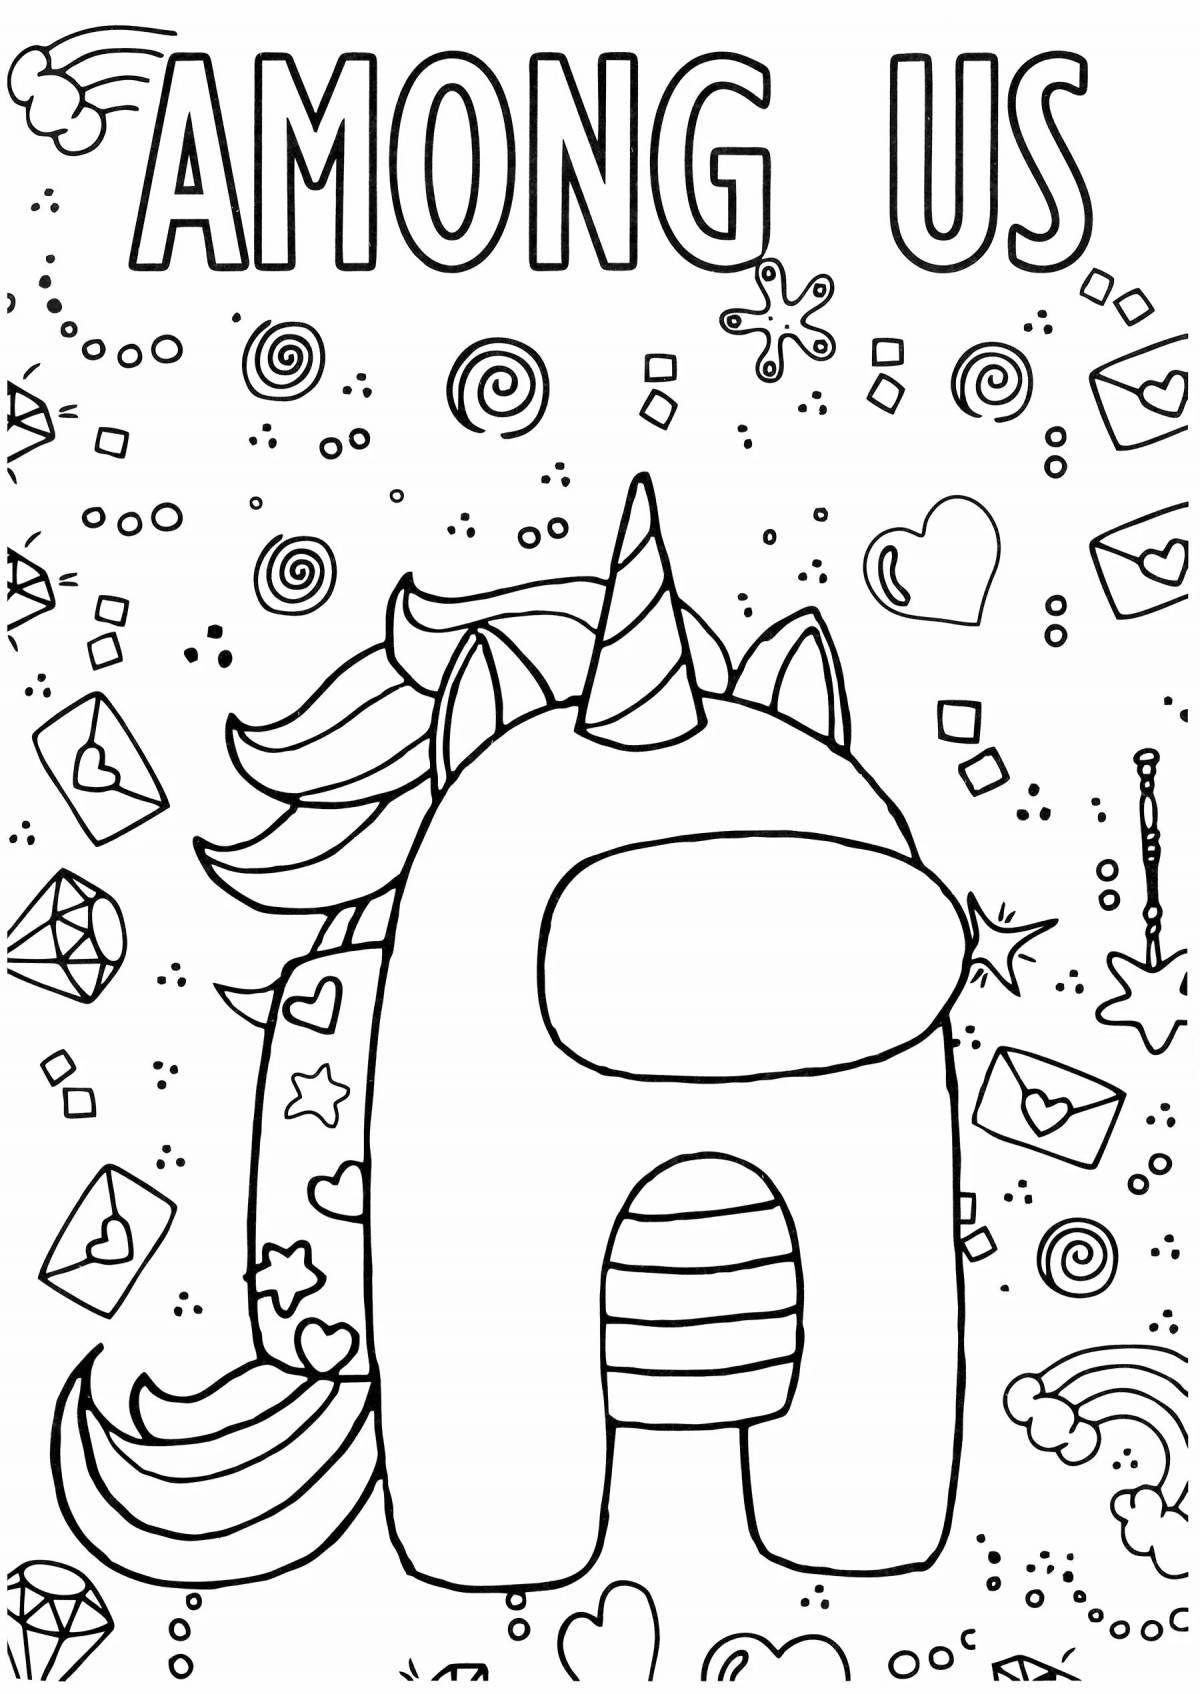 Coloring page cheeky ace cat